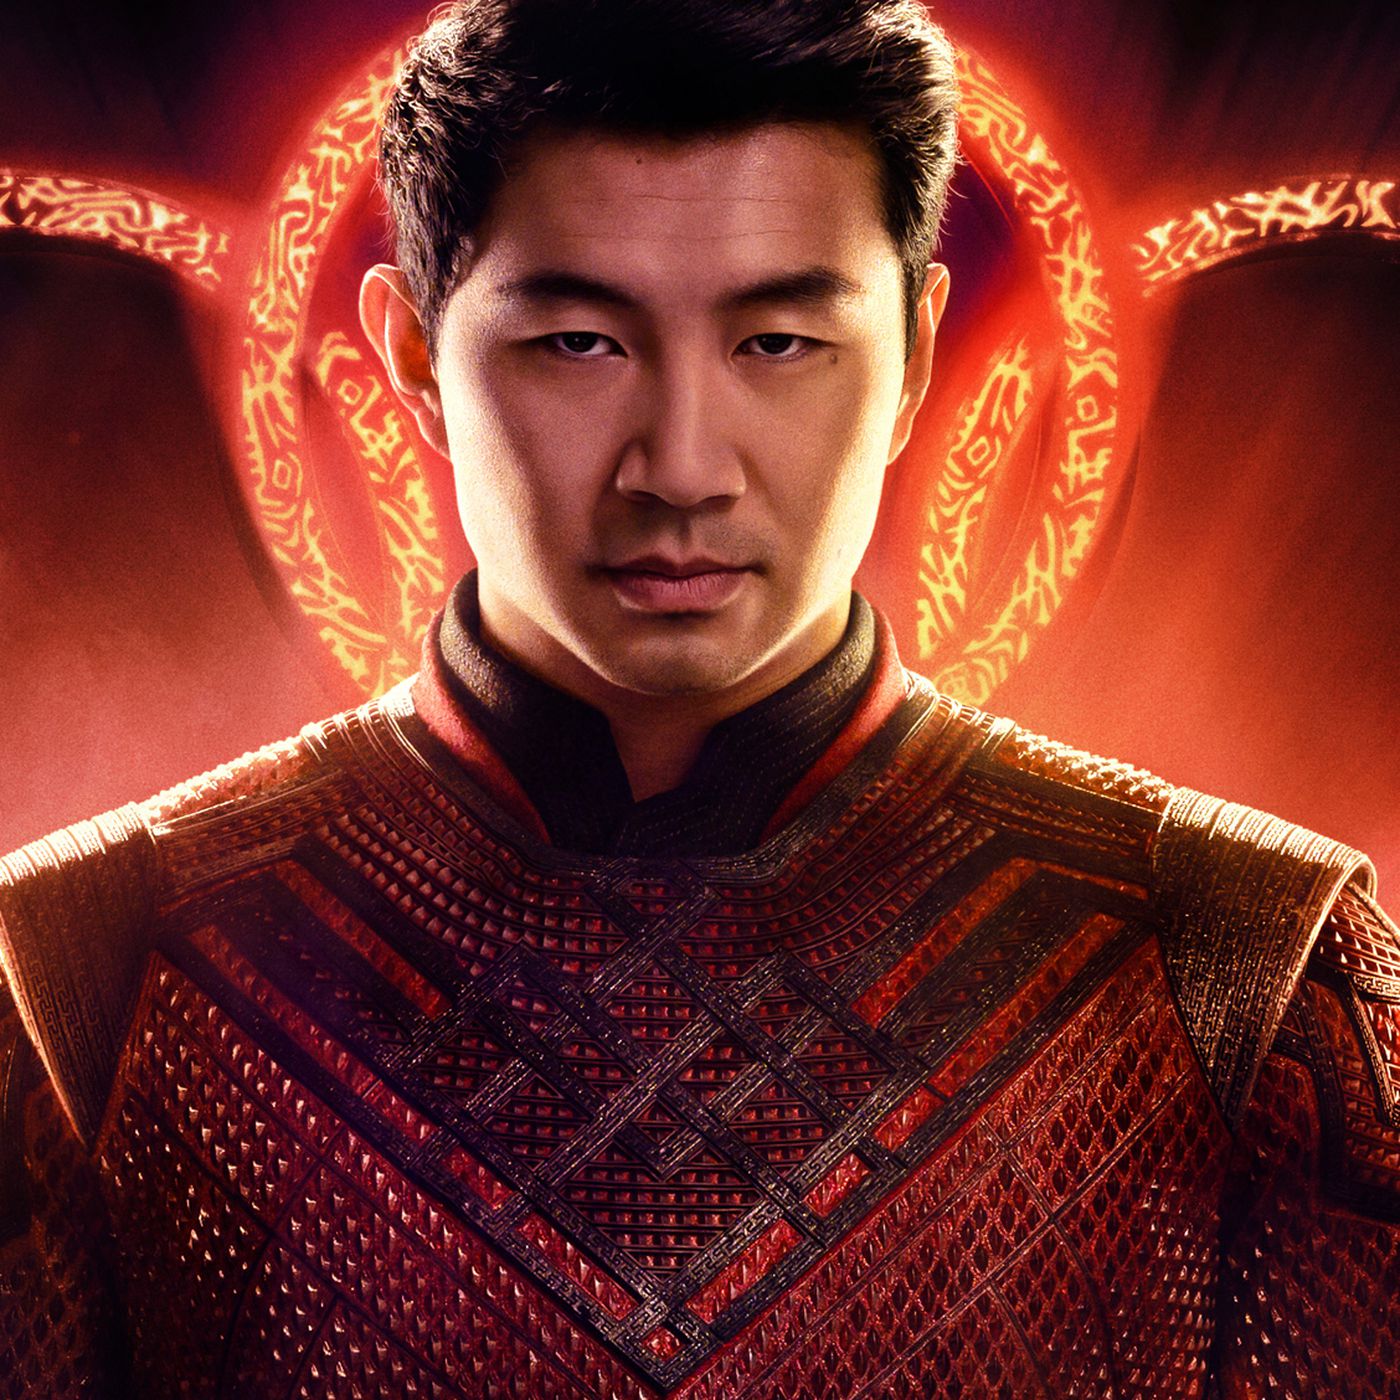 Shang-Chi: The Legend of the Ten Rings